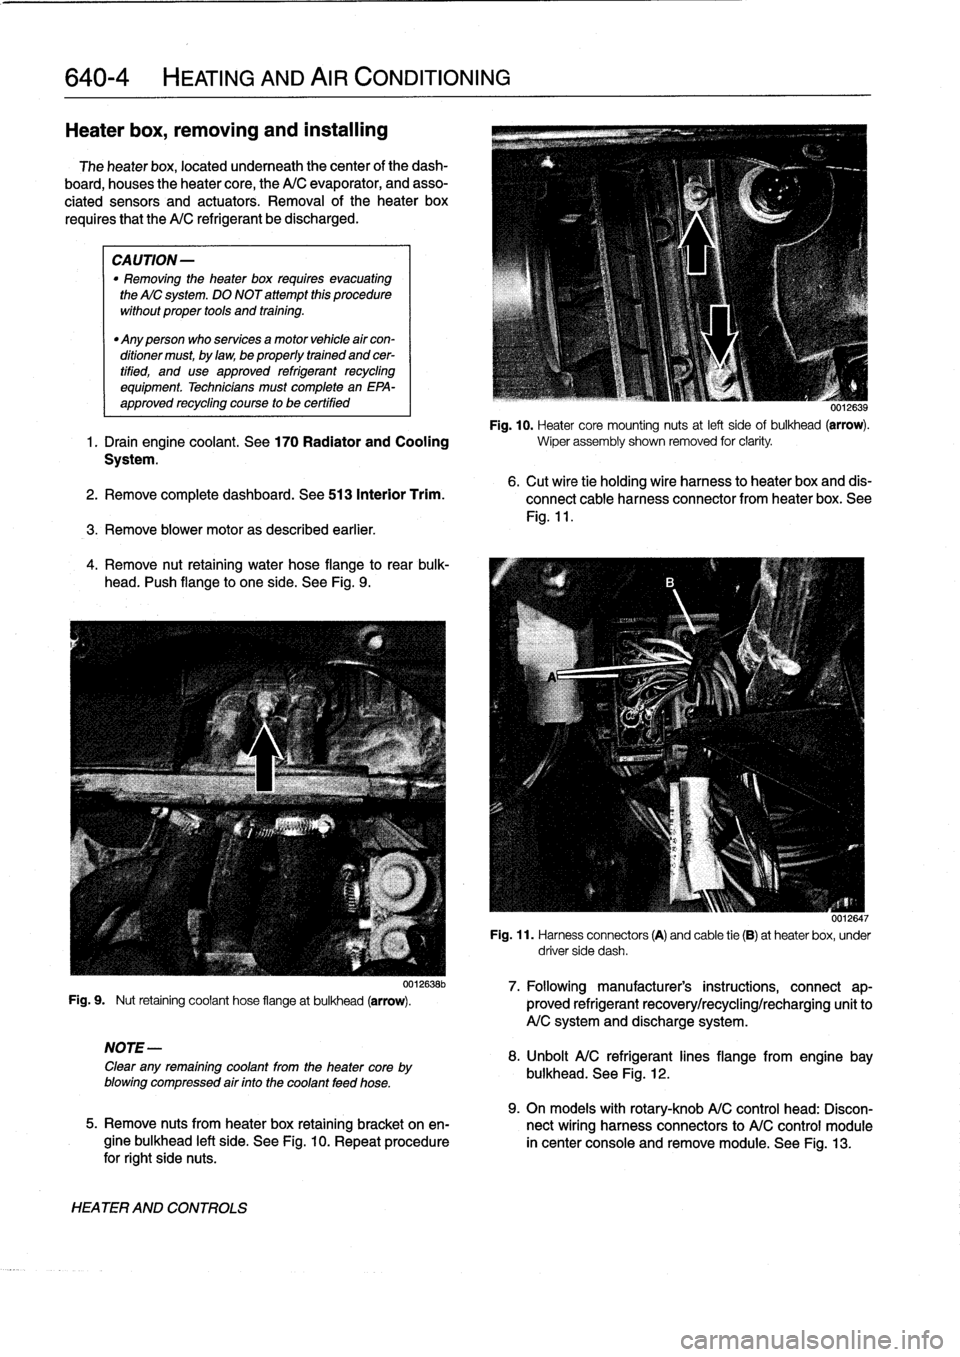 BMW 318i 1997 E36 Service Manual 
640-4

	

HEATING
AND
AIR
CONDITIONING

Heater
box,
removing
and
installing

The
heater
box,
located
underneath
thecenter
of
the
dash-

board,
houses
theheater
core,
the
A/C
evaporator,
and
asso-

ci